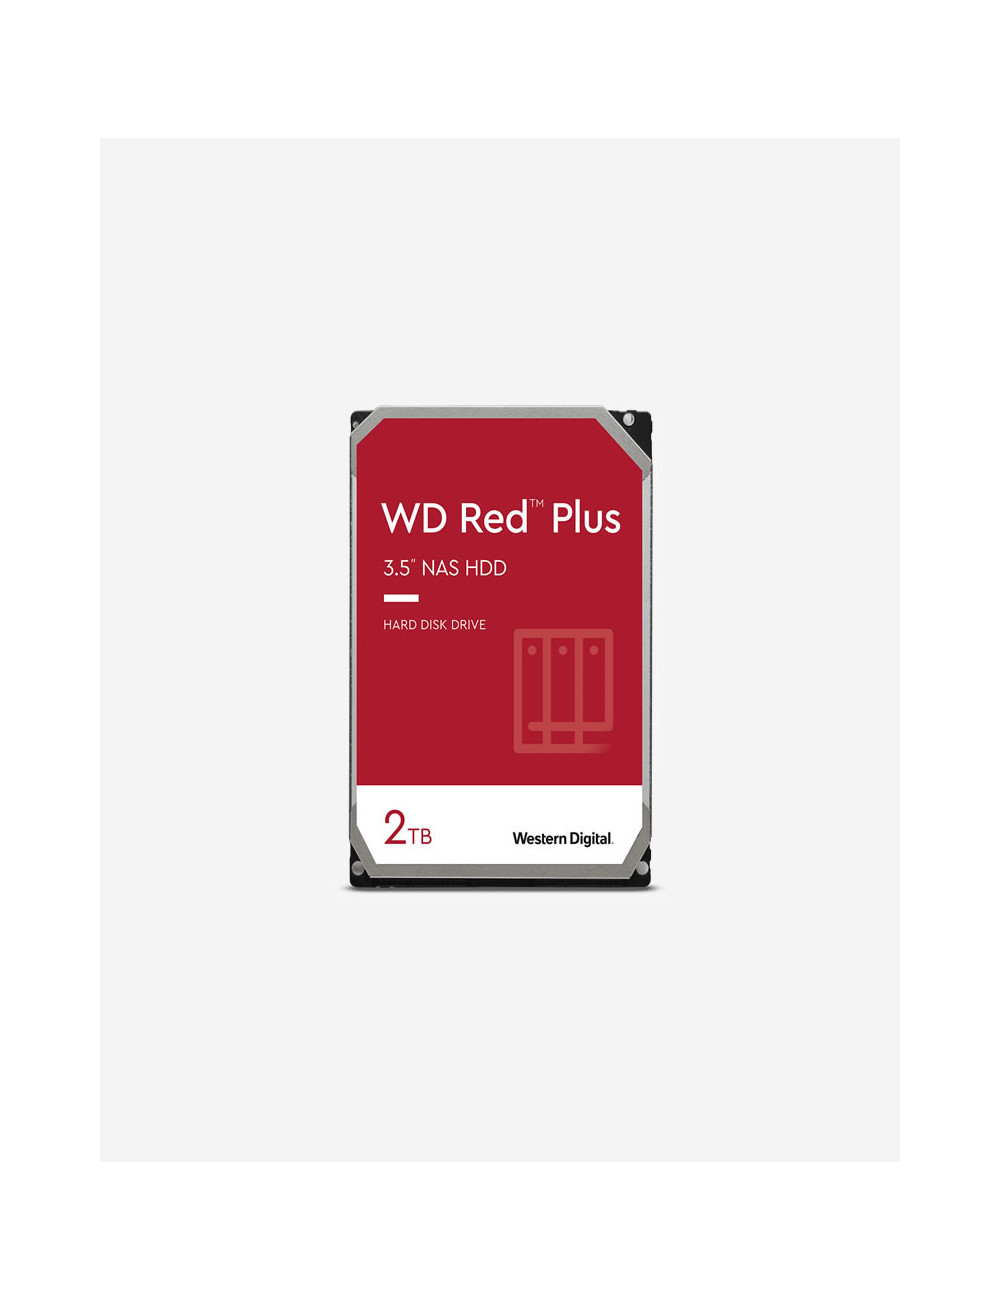 WD RED PLUS 2TB 3.5" HDD Drive